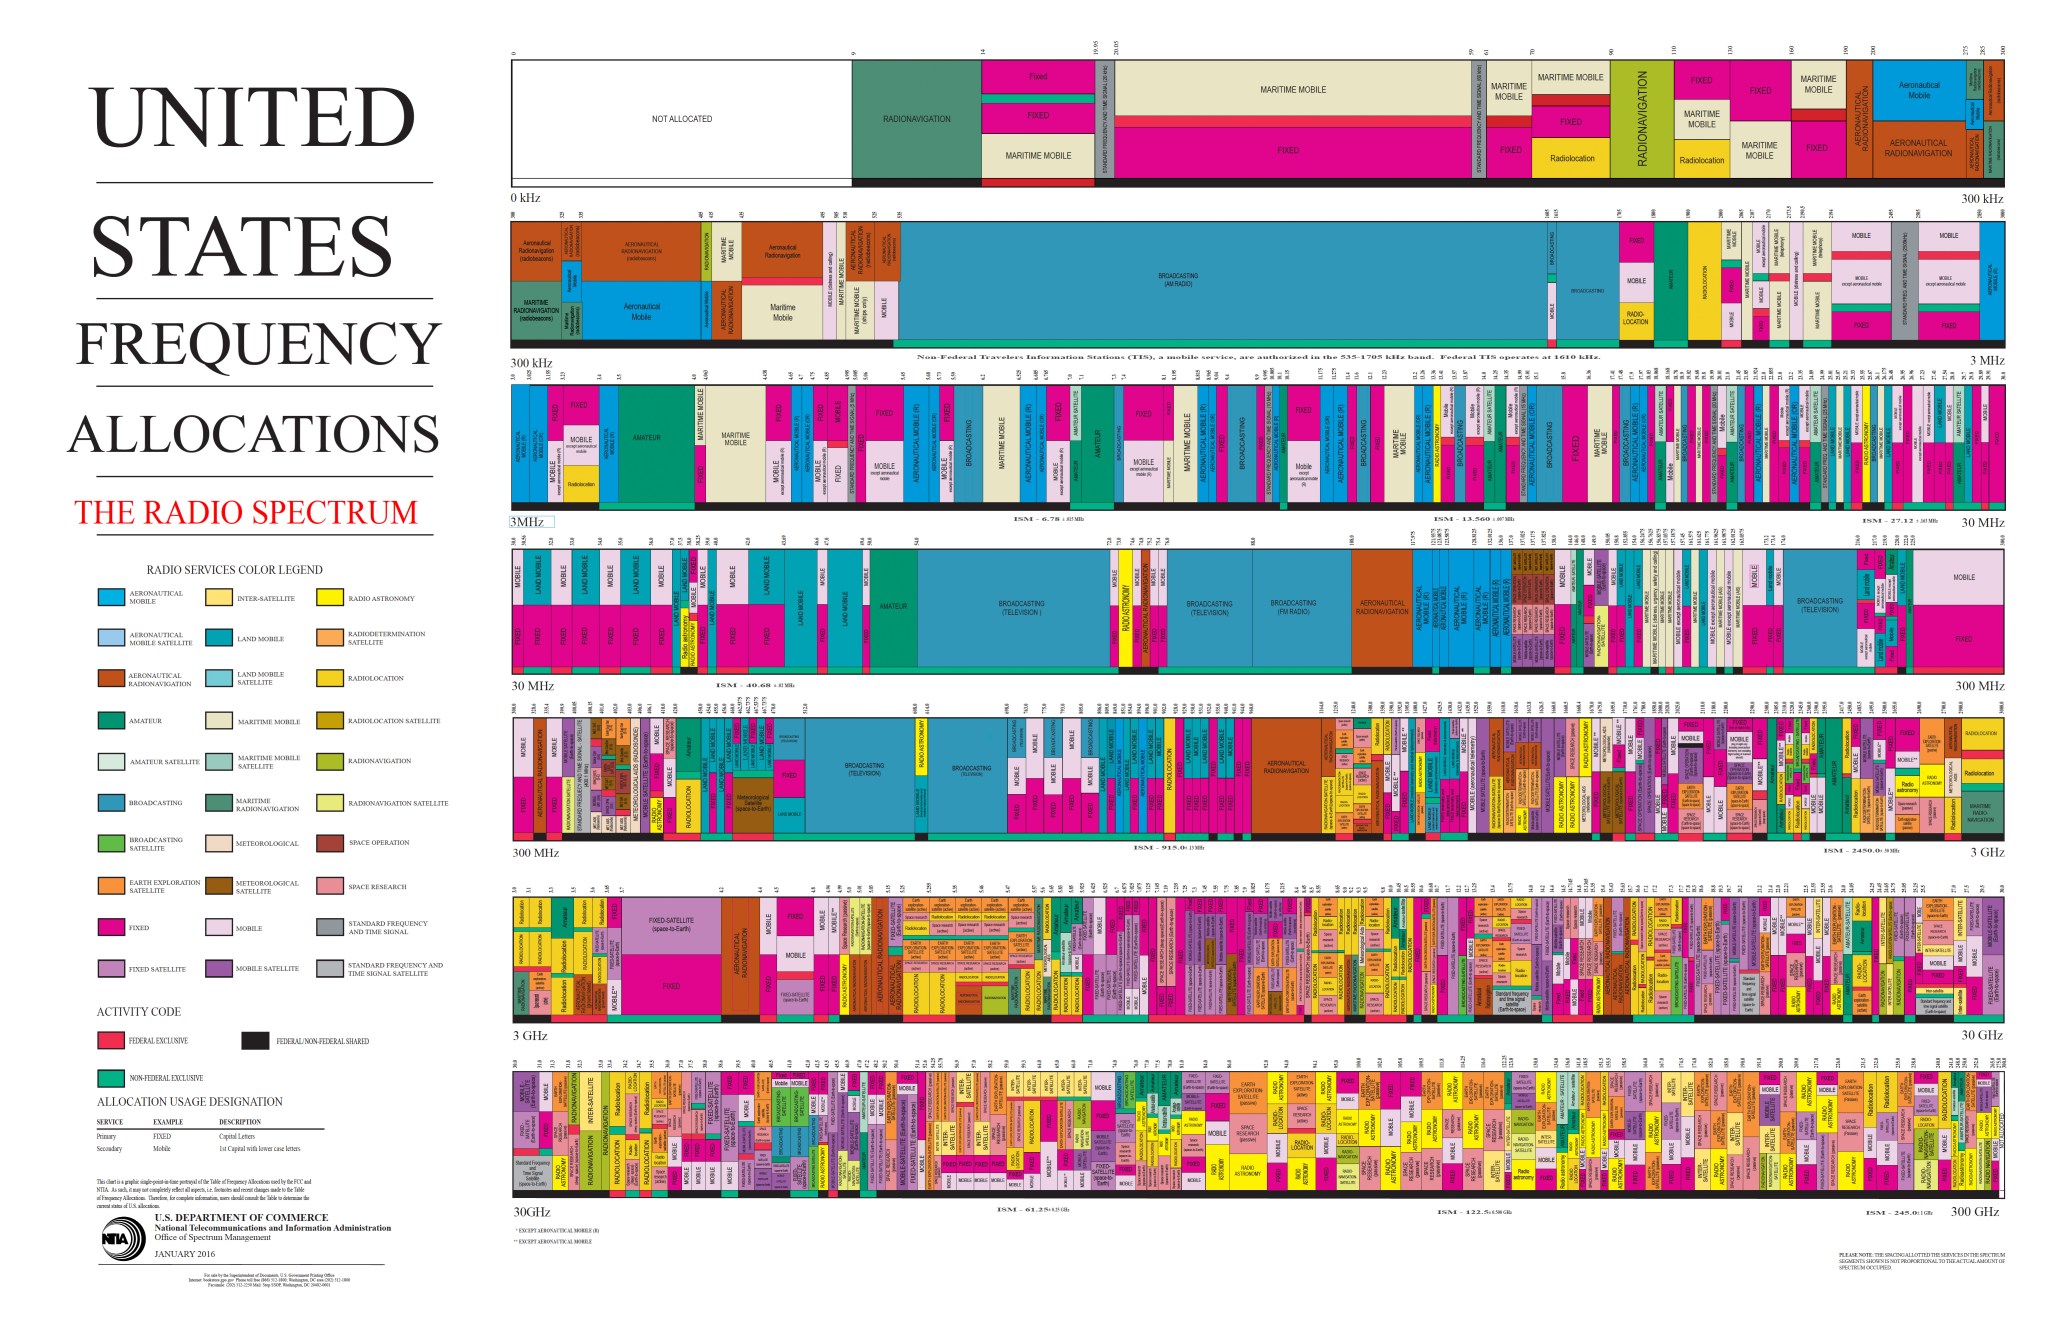 United States radio spectrum frequency allocations chart.